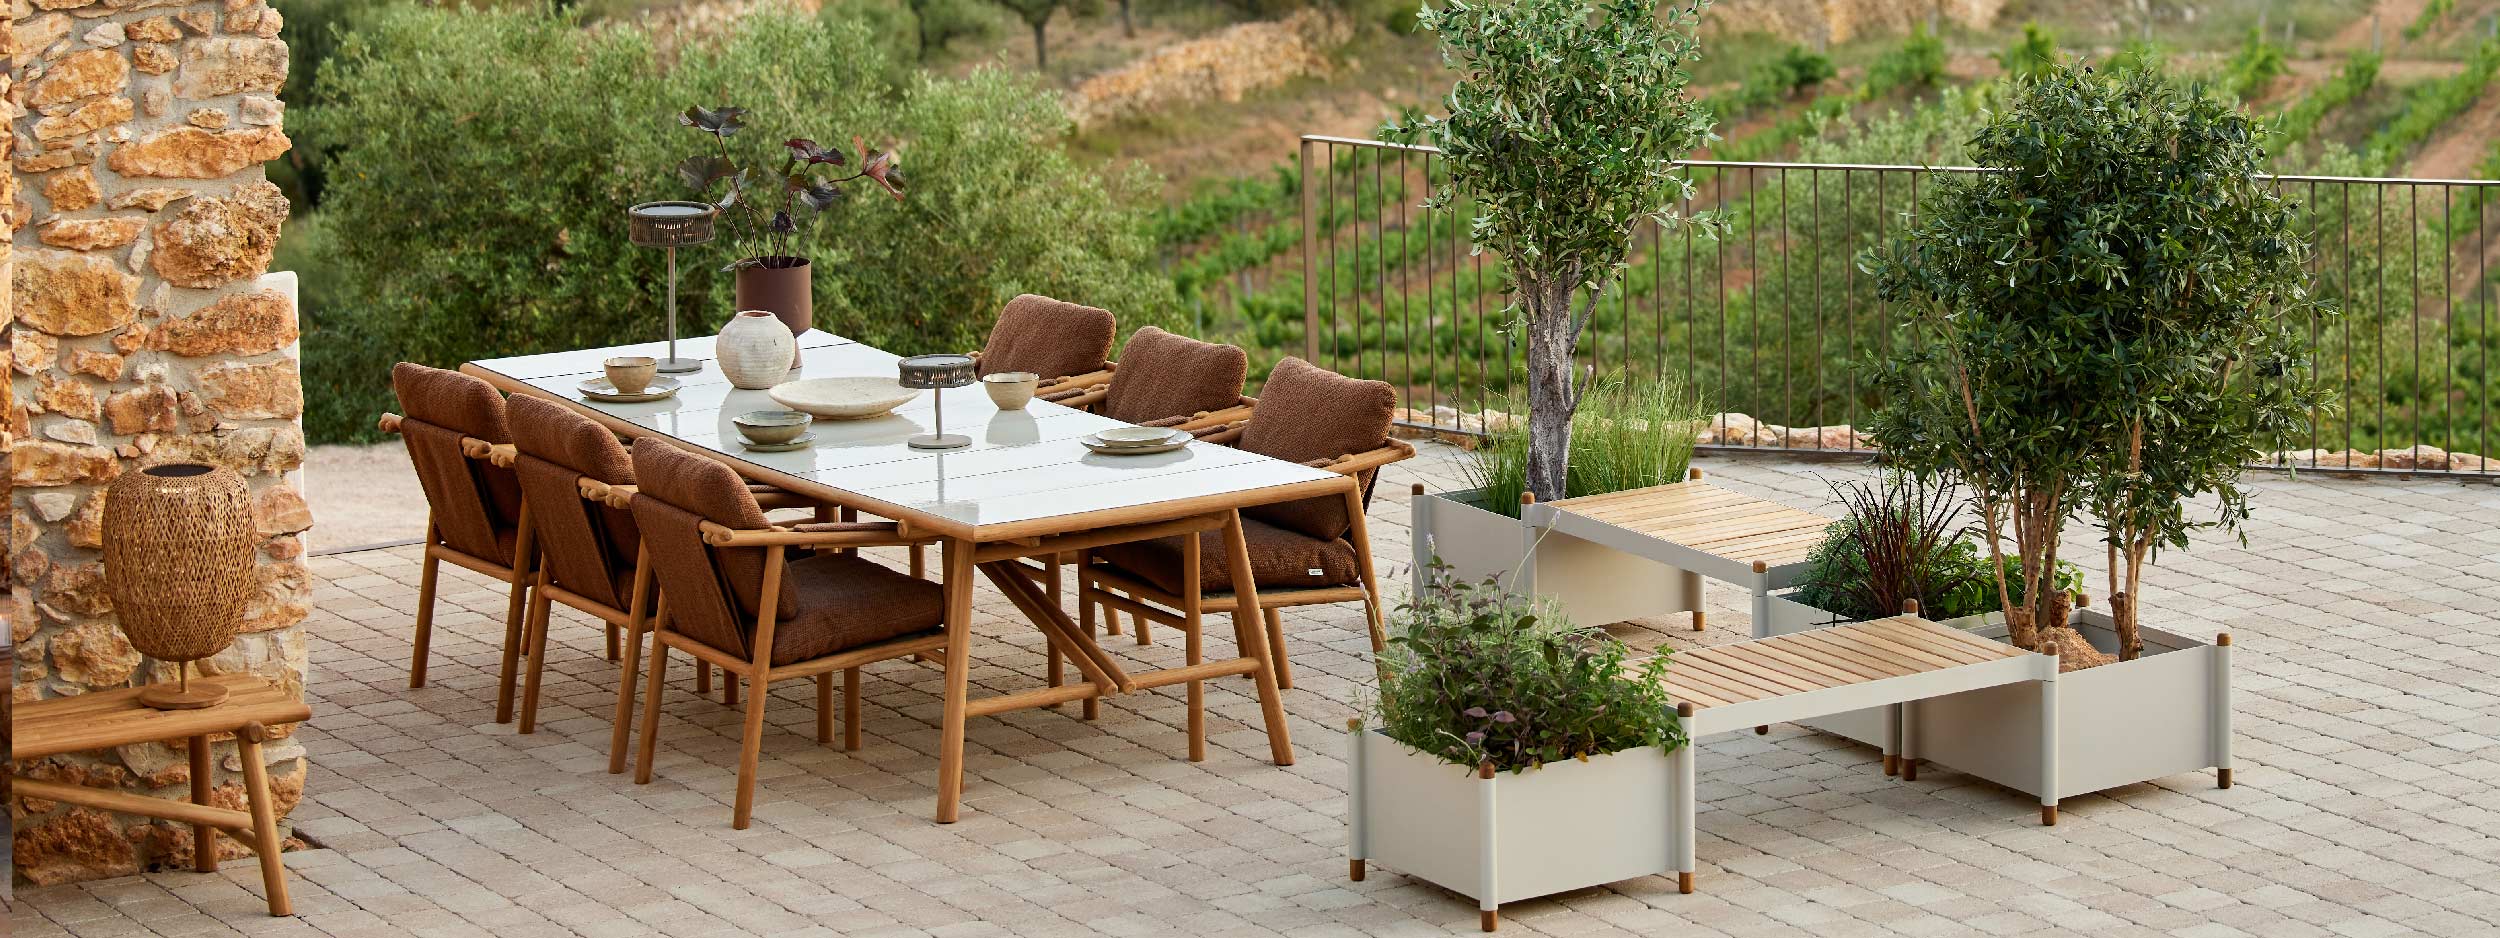 Image of Cane-line Sticks teak dining furniture and Sticks planters and benches on rustic terrace